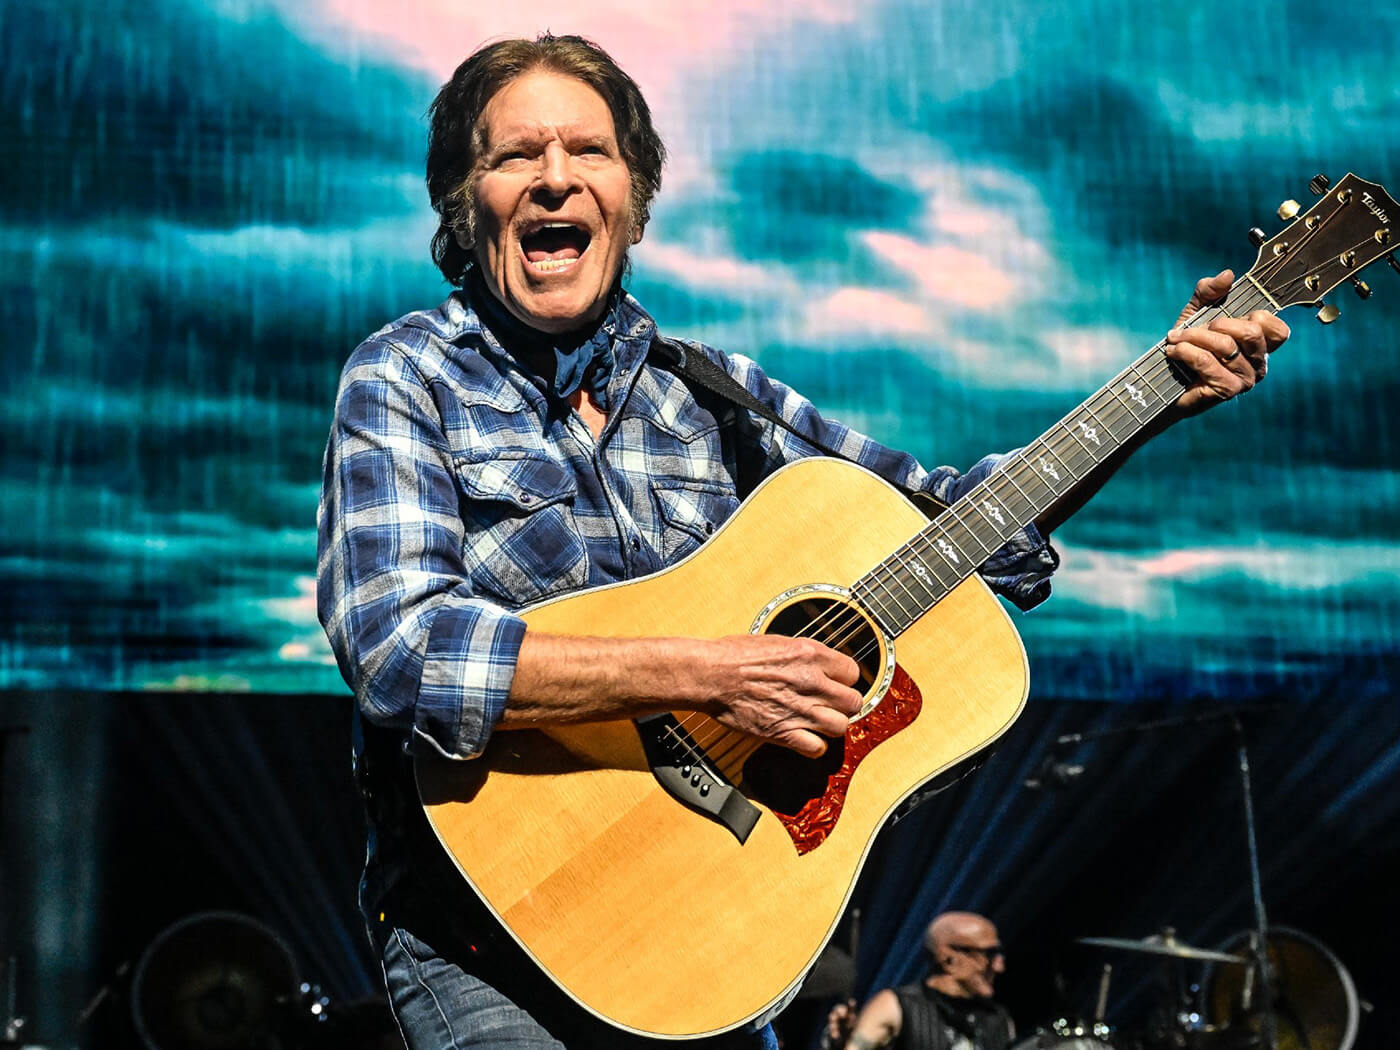 John Fogerty regains ownership of Creedence Clearwater Revival catalogue after 50-year battle